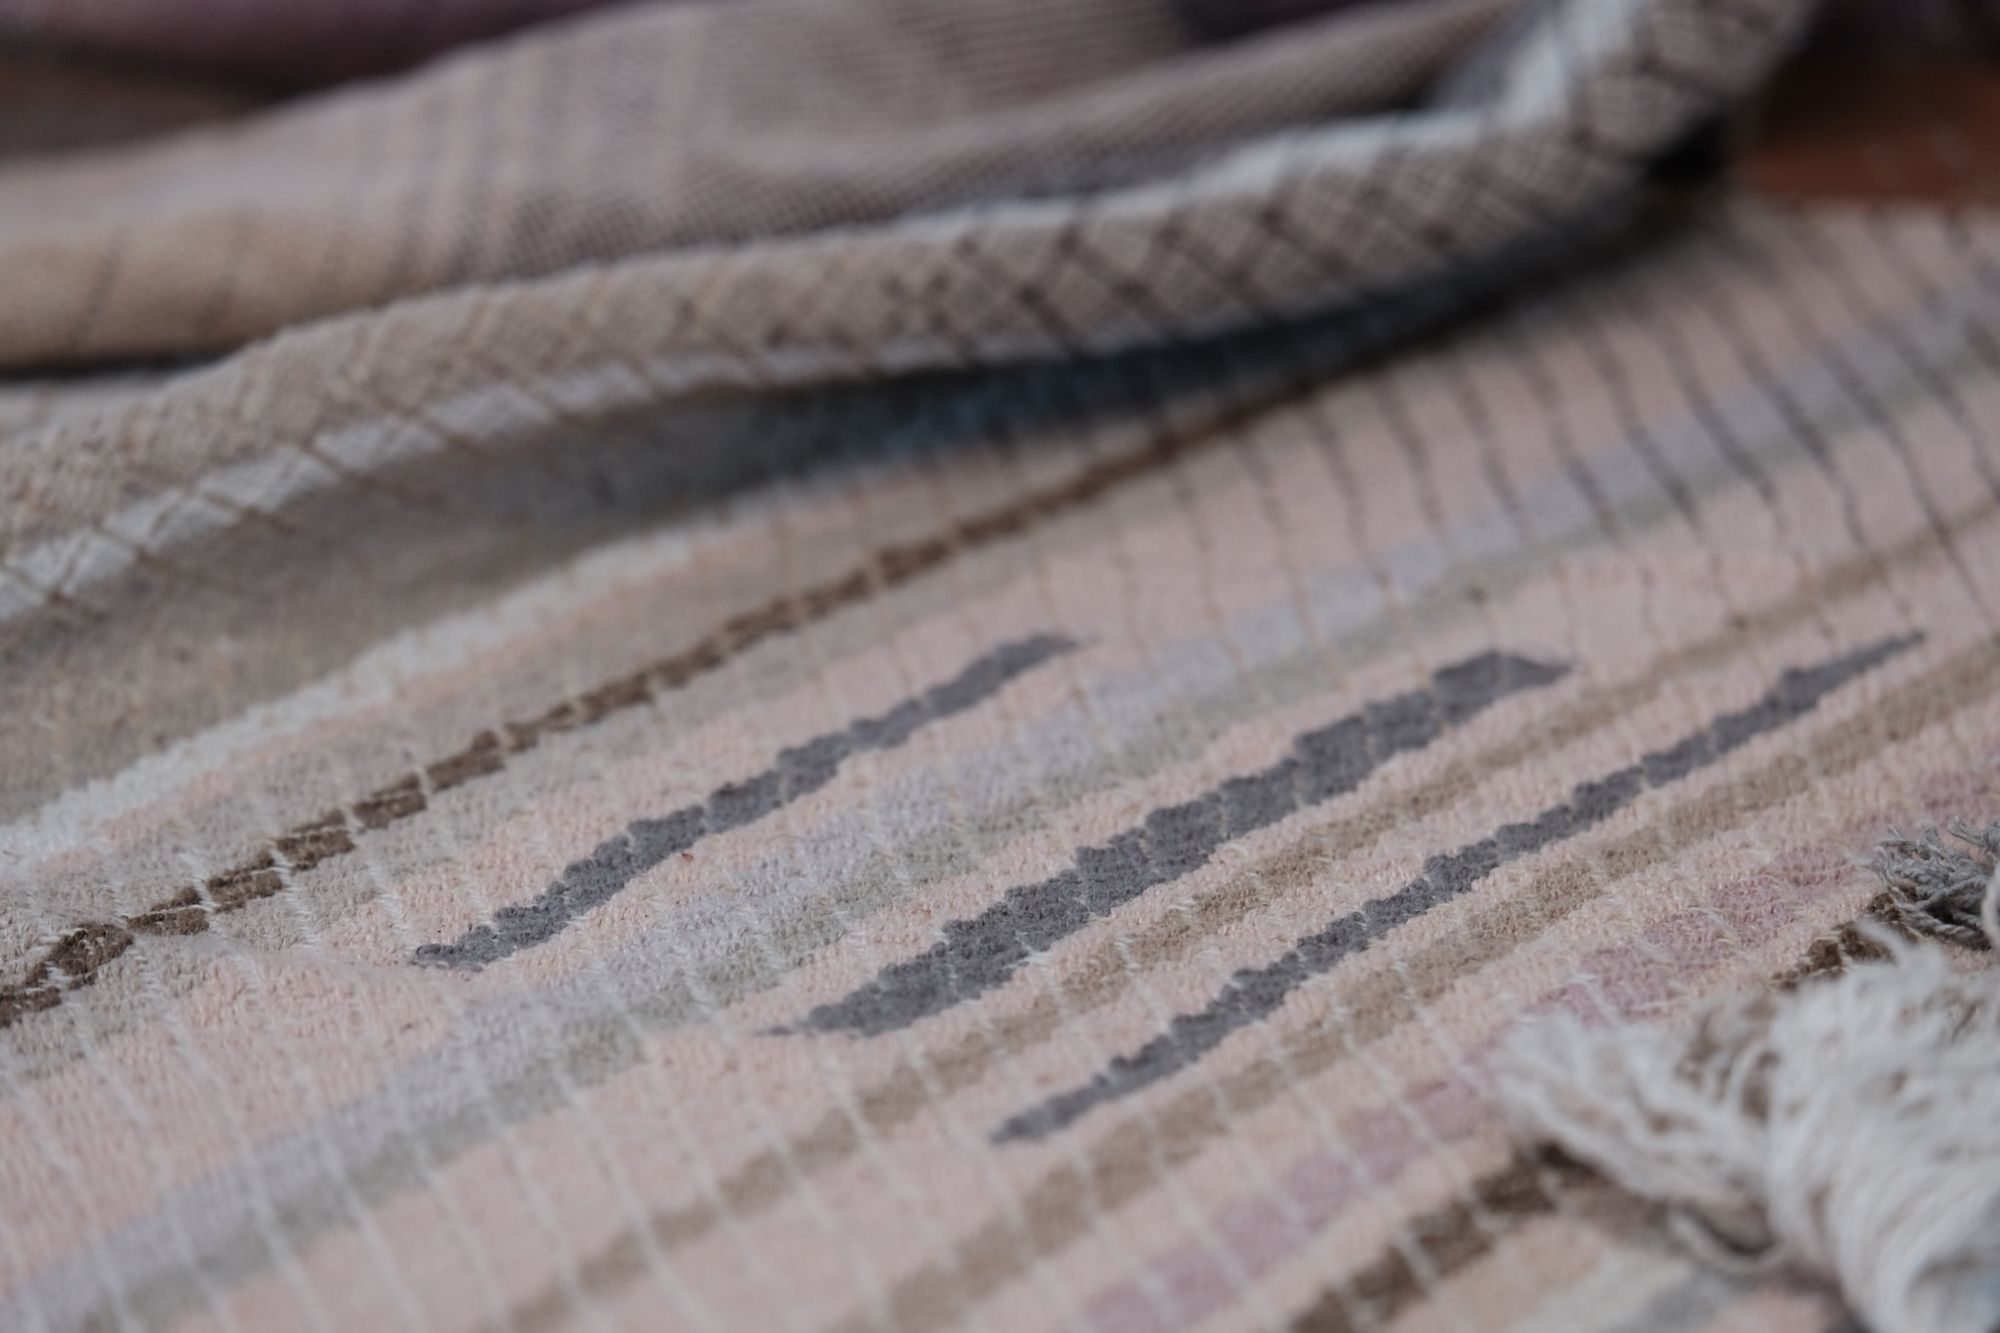 handwoven fabric of Naturally dyed subtle rainbow hues with a diamond texture pattern lays on a wooden floor